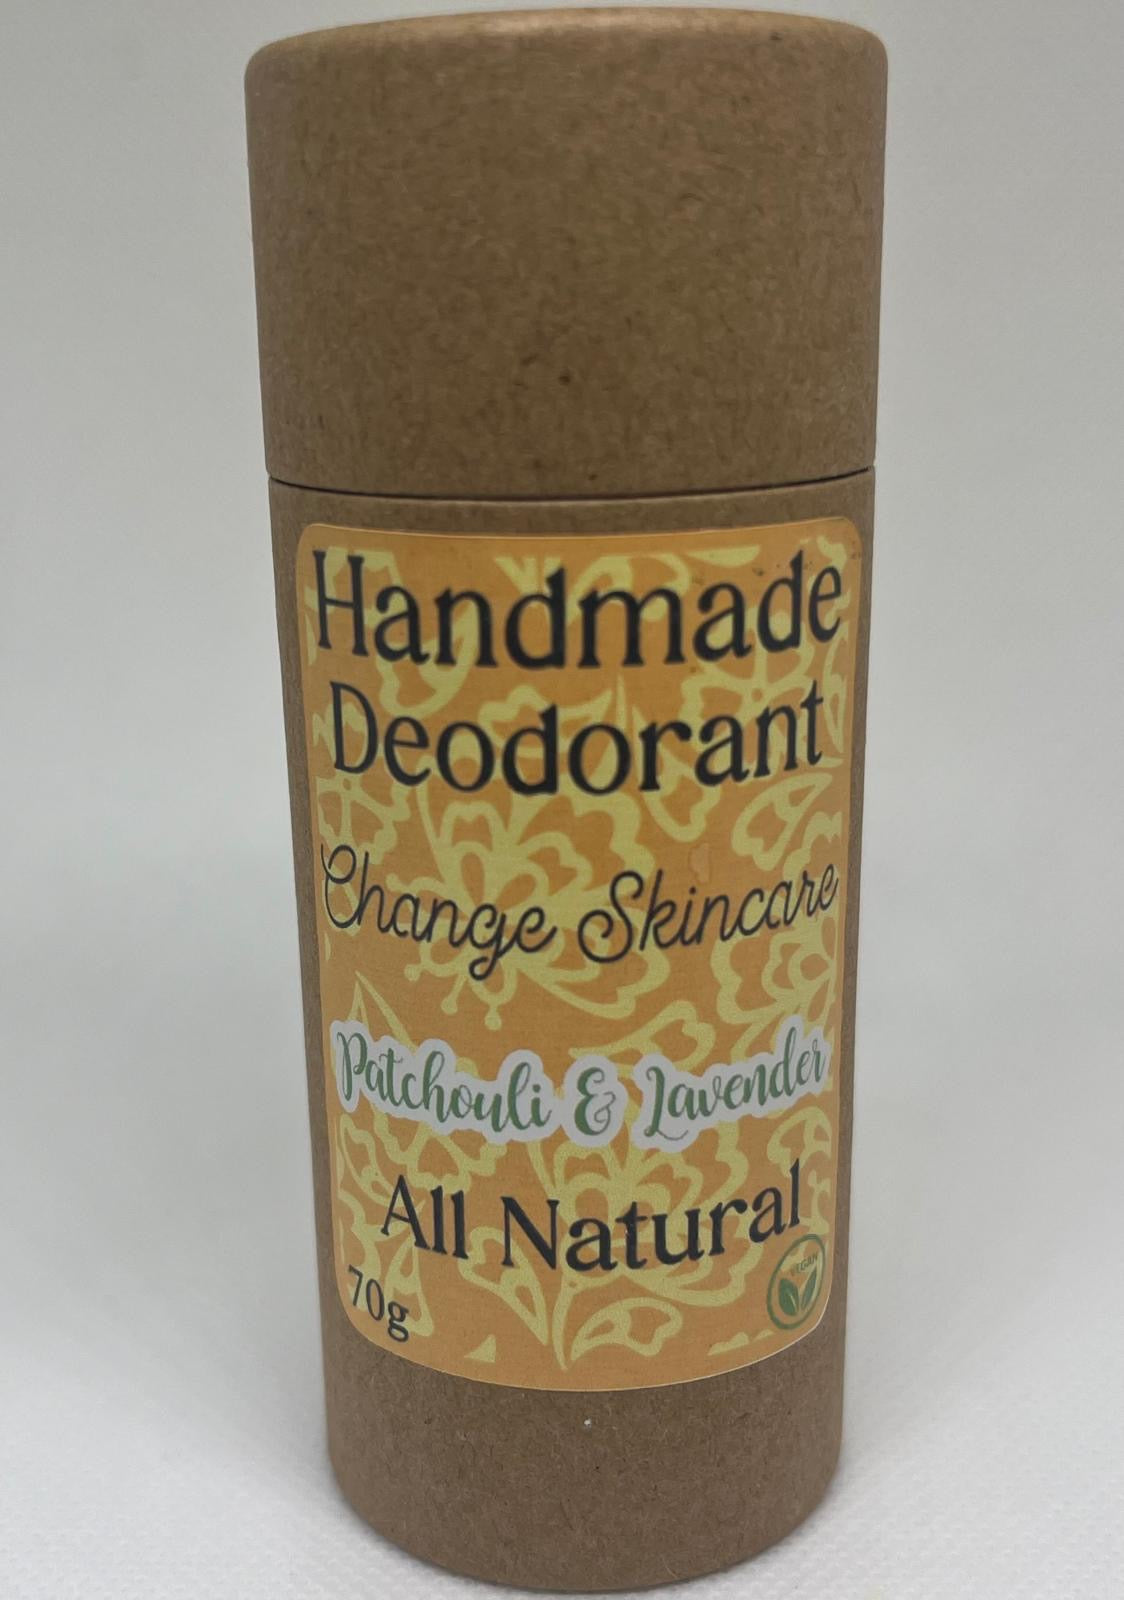 Natural Deodorant with Patchouli & Lavender